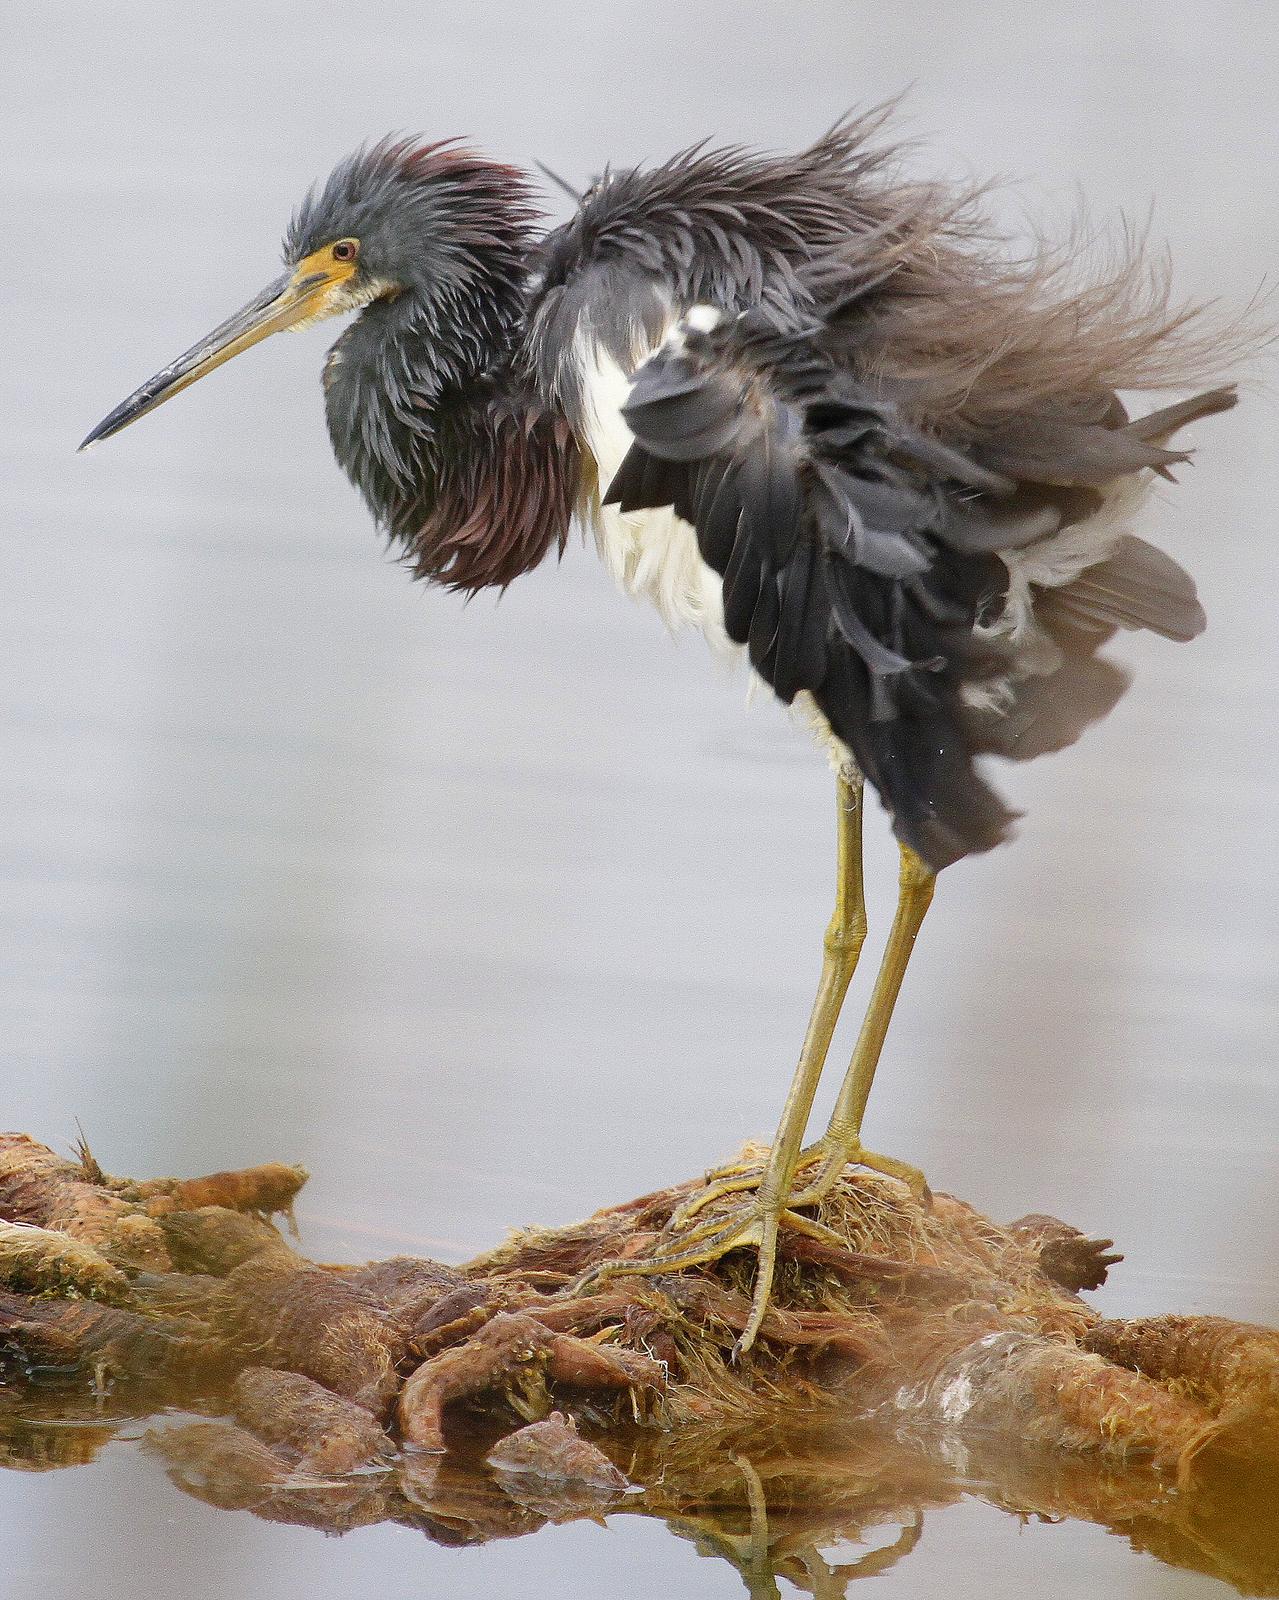 Tricolored Heron Photo by Isaac Sanchez